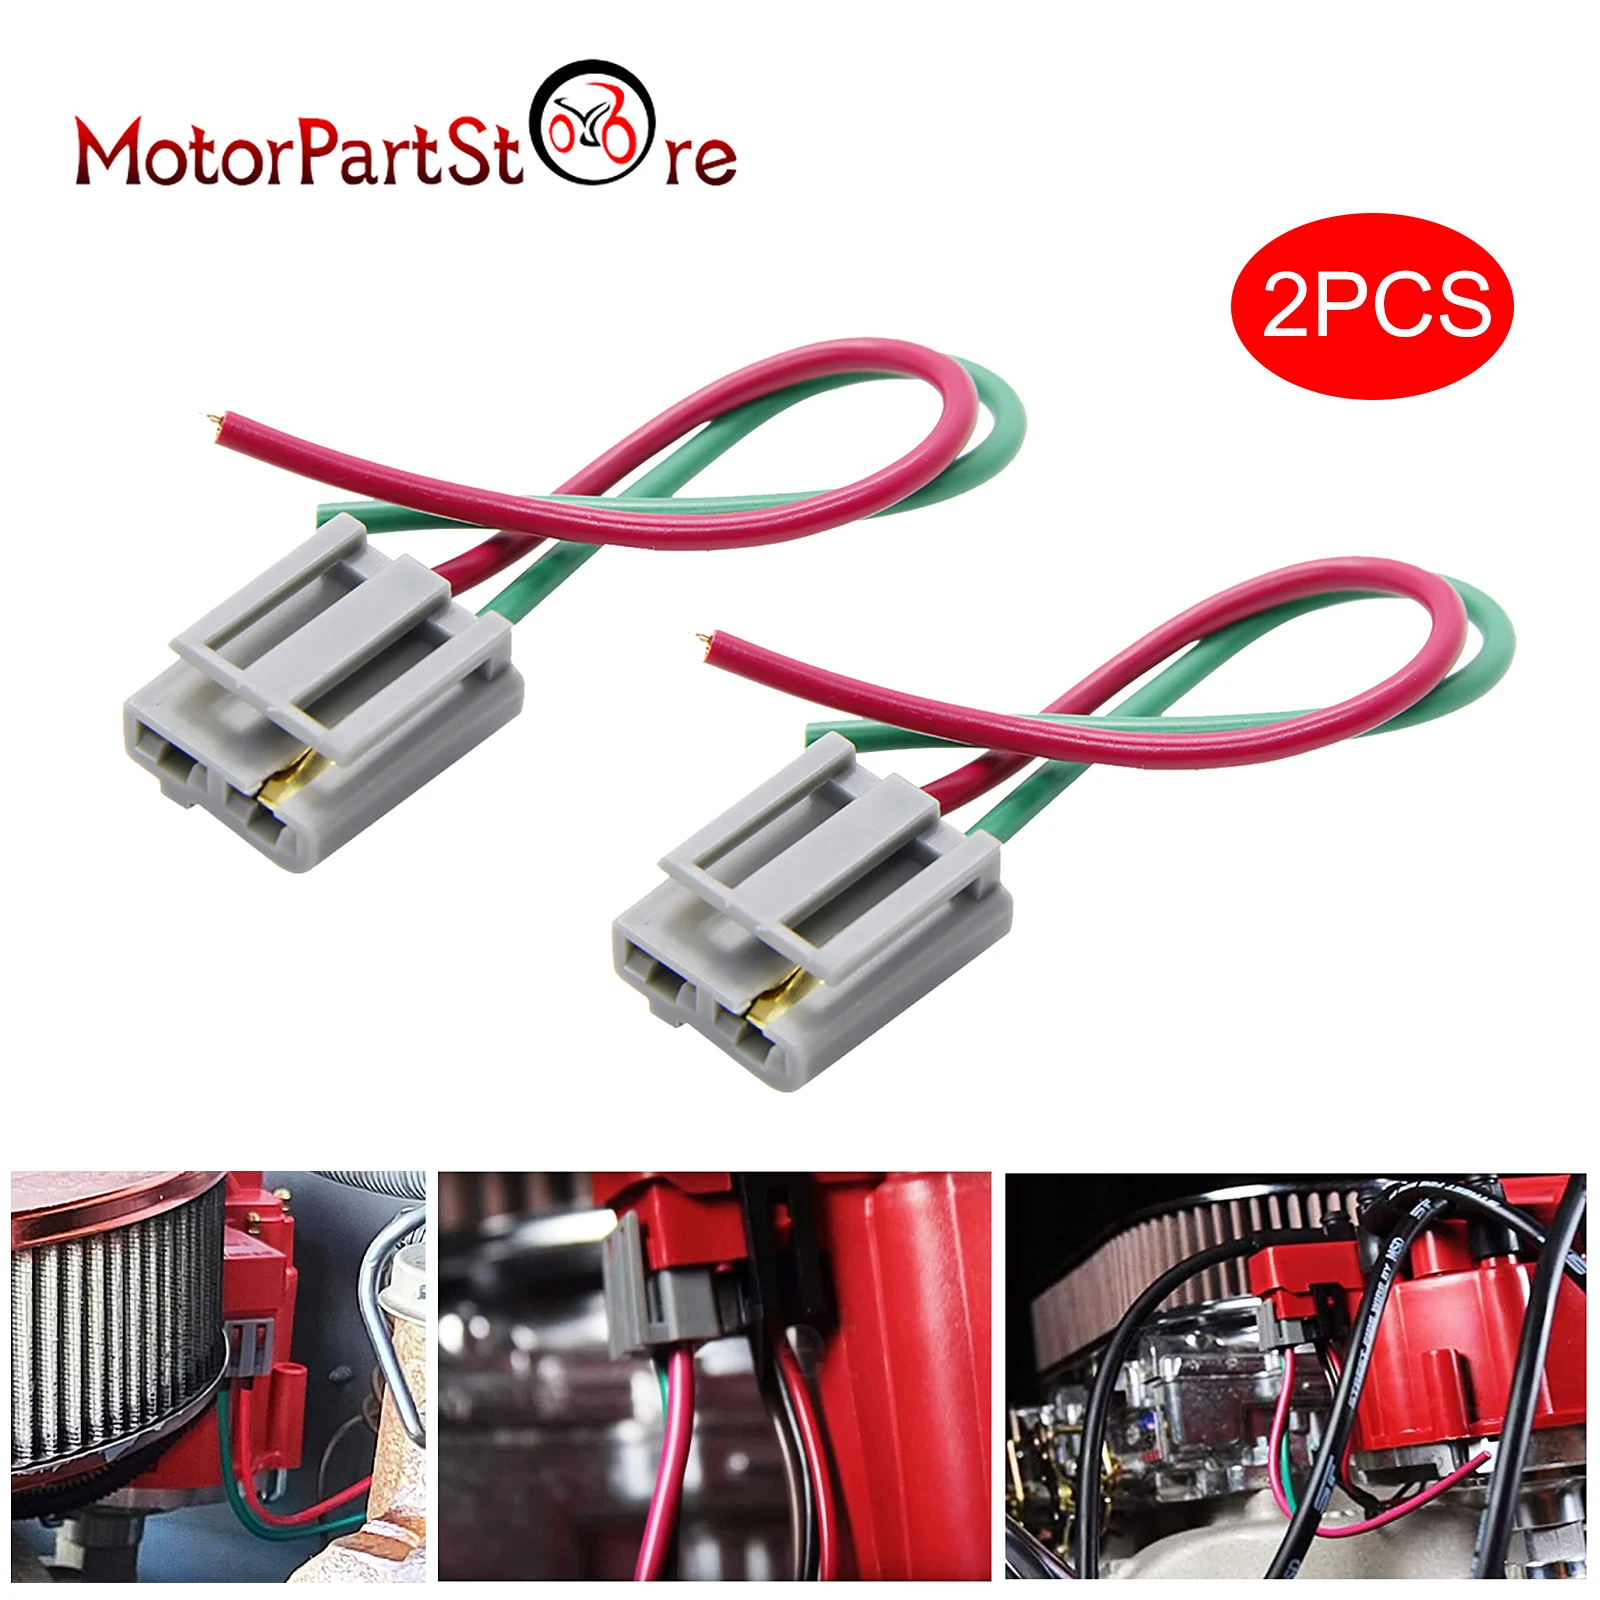 2 Sets GM HEI Distributor Power & Tach Connector 12V Pigtail Harness 6500 